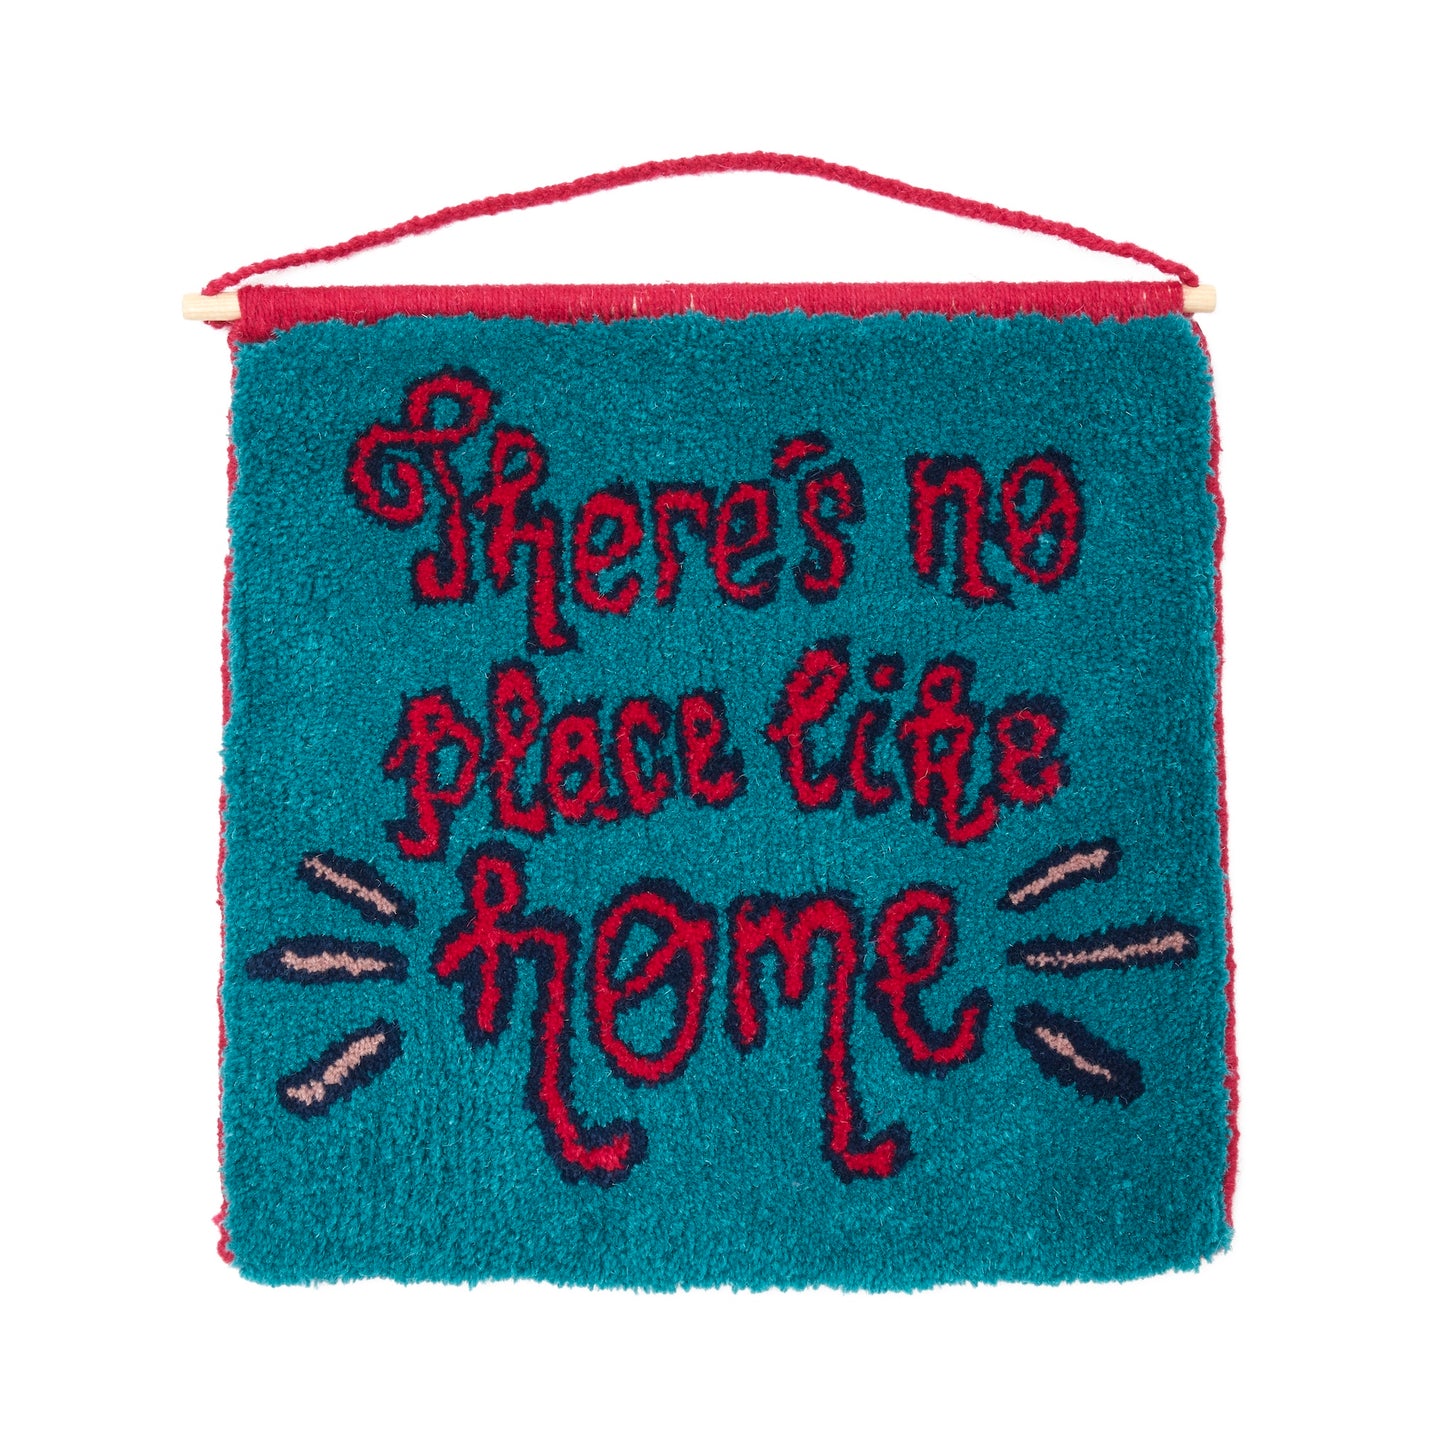 THERE'S NO PLACE LIKE HOME - TURQUOISE AND MAGENTA HANDMADE WALL HANGING